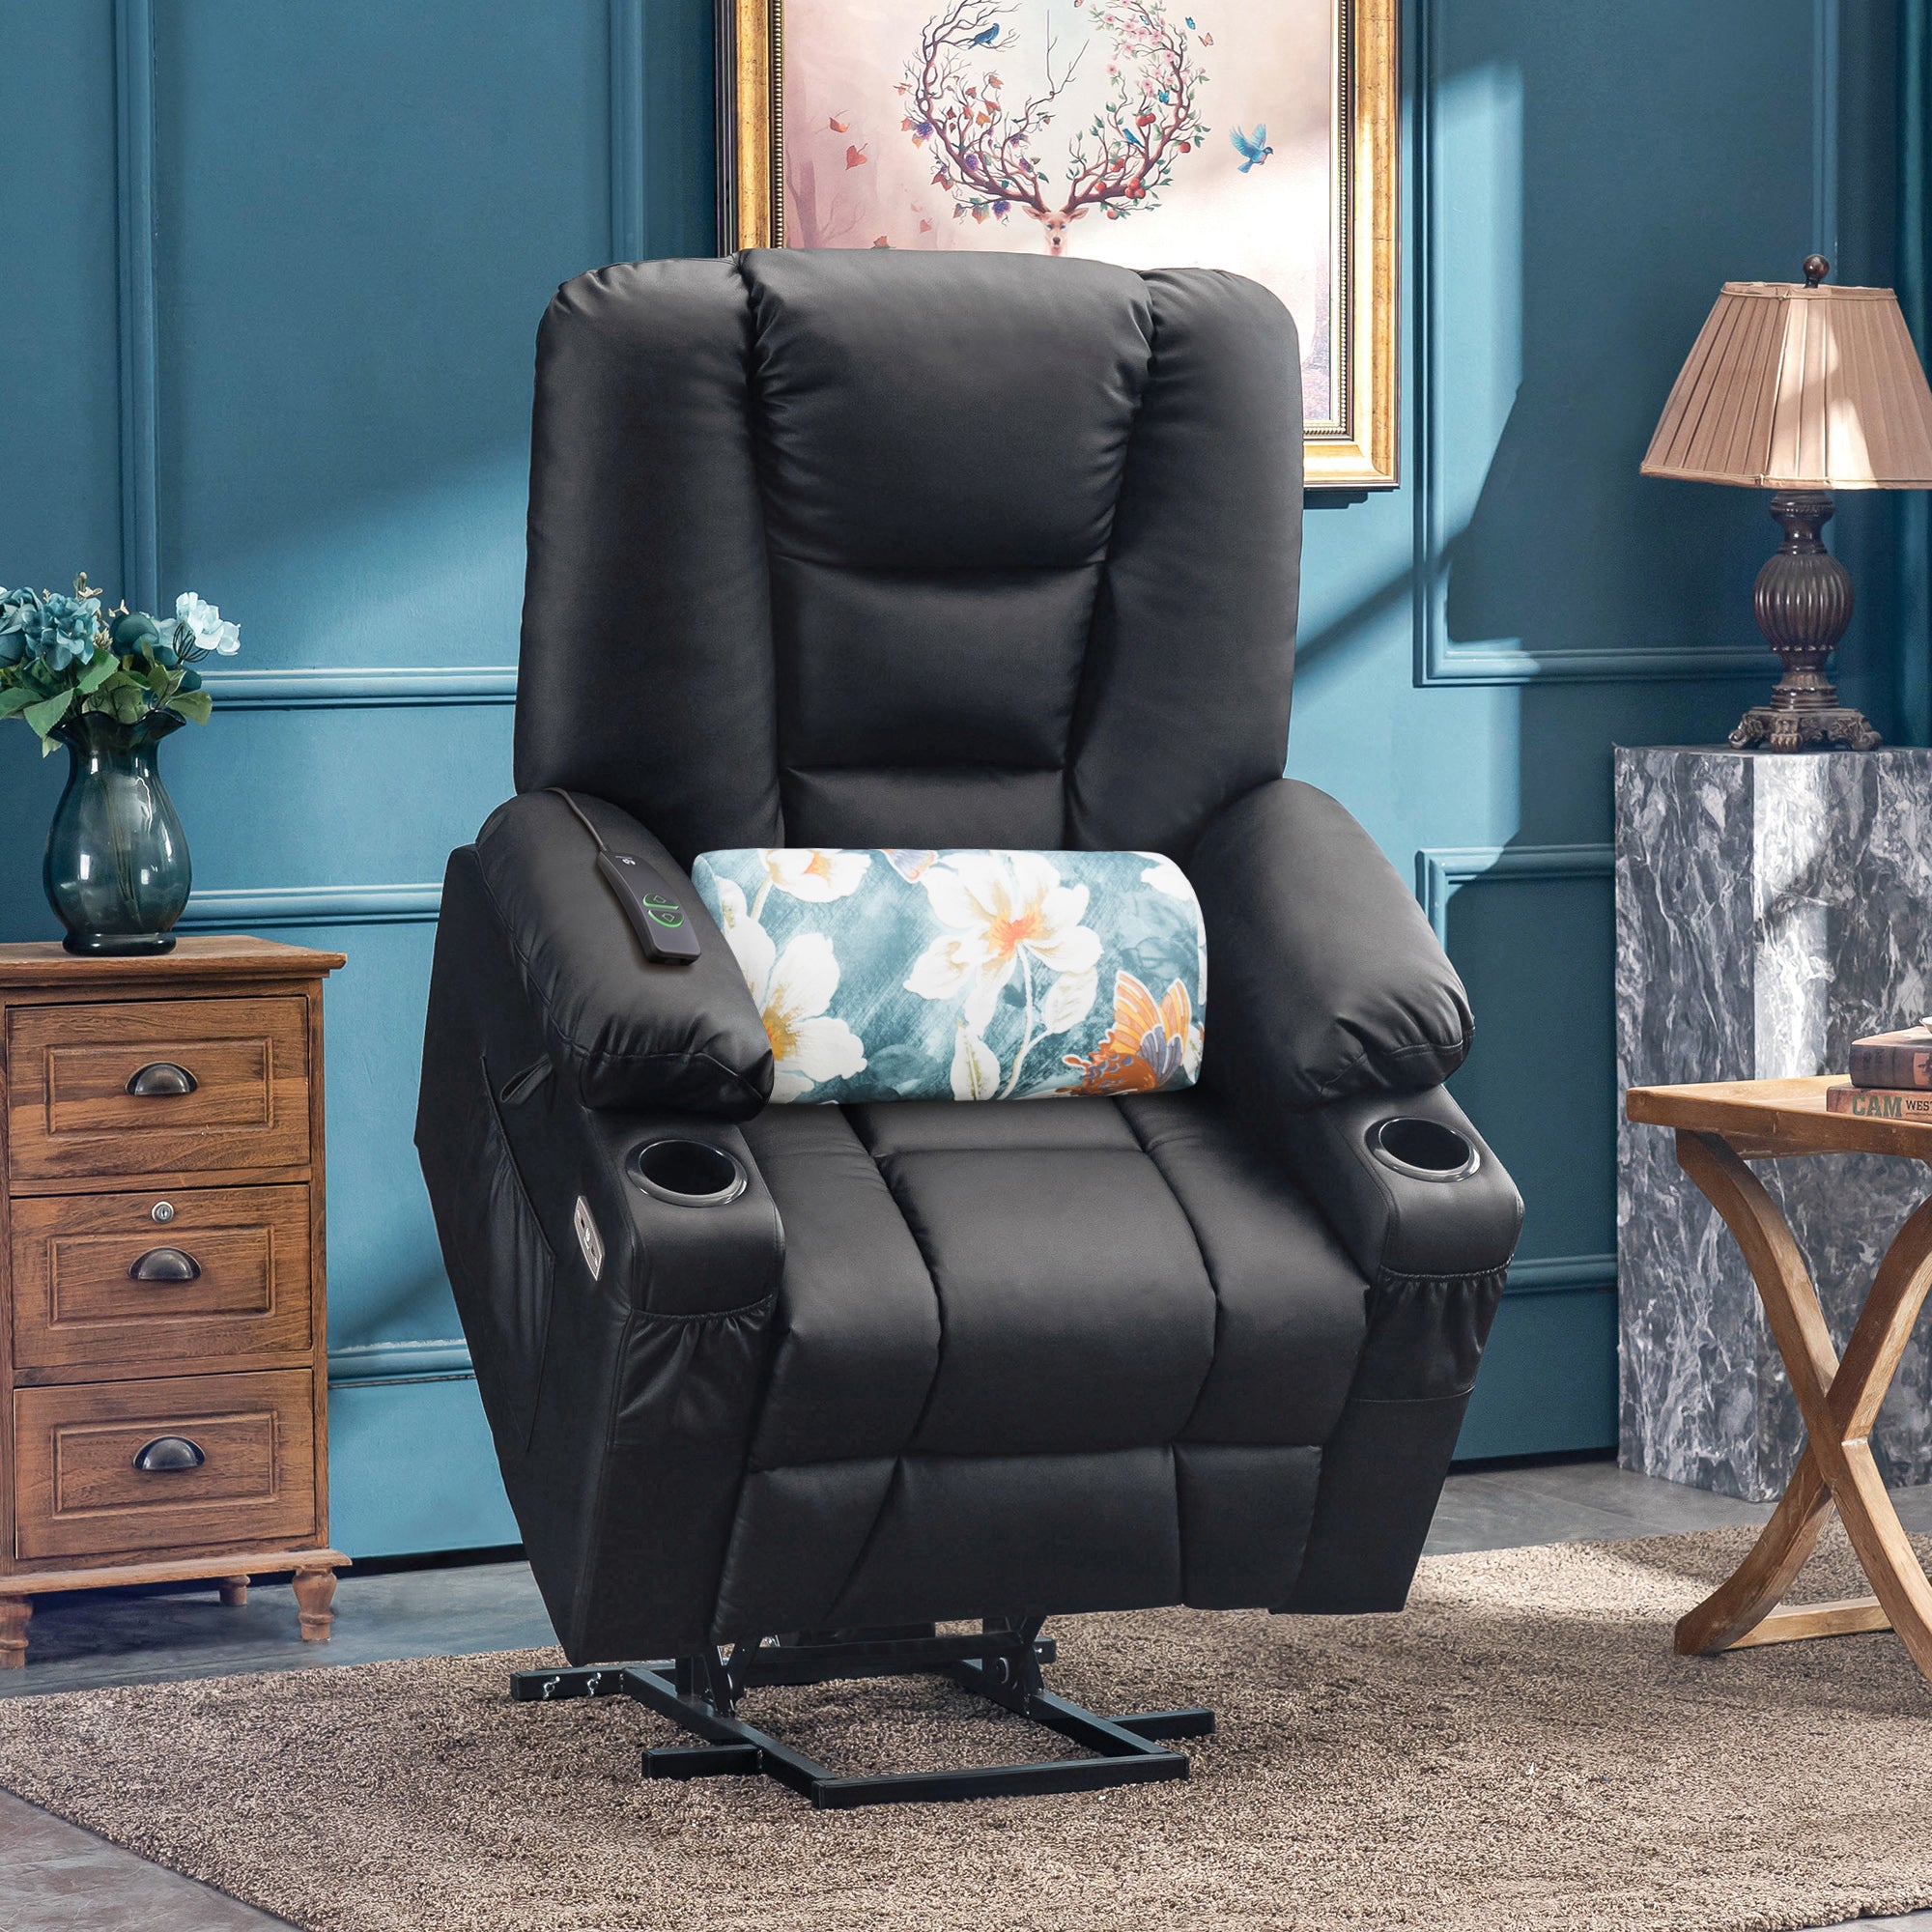 MCombo Power Lift Recliner Chair with Massage and Heat for Elderly, Extended Footrest, 3 Positions, Cup Holders, USB Ports, Faux Leather 7519 Series